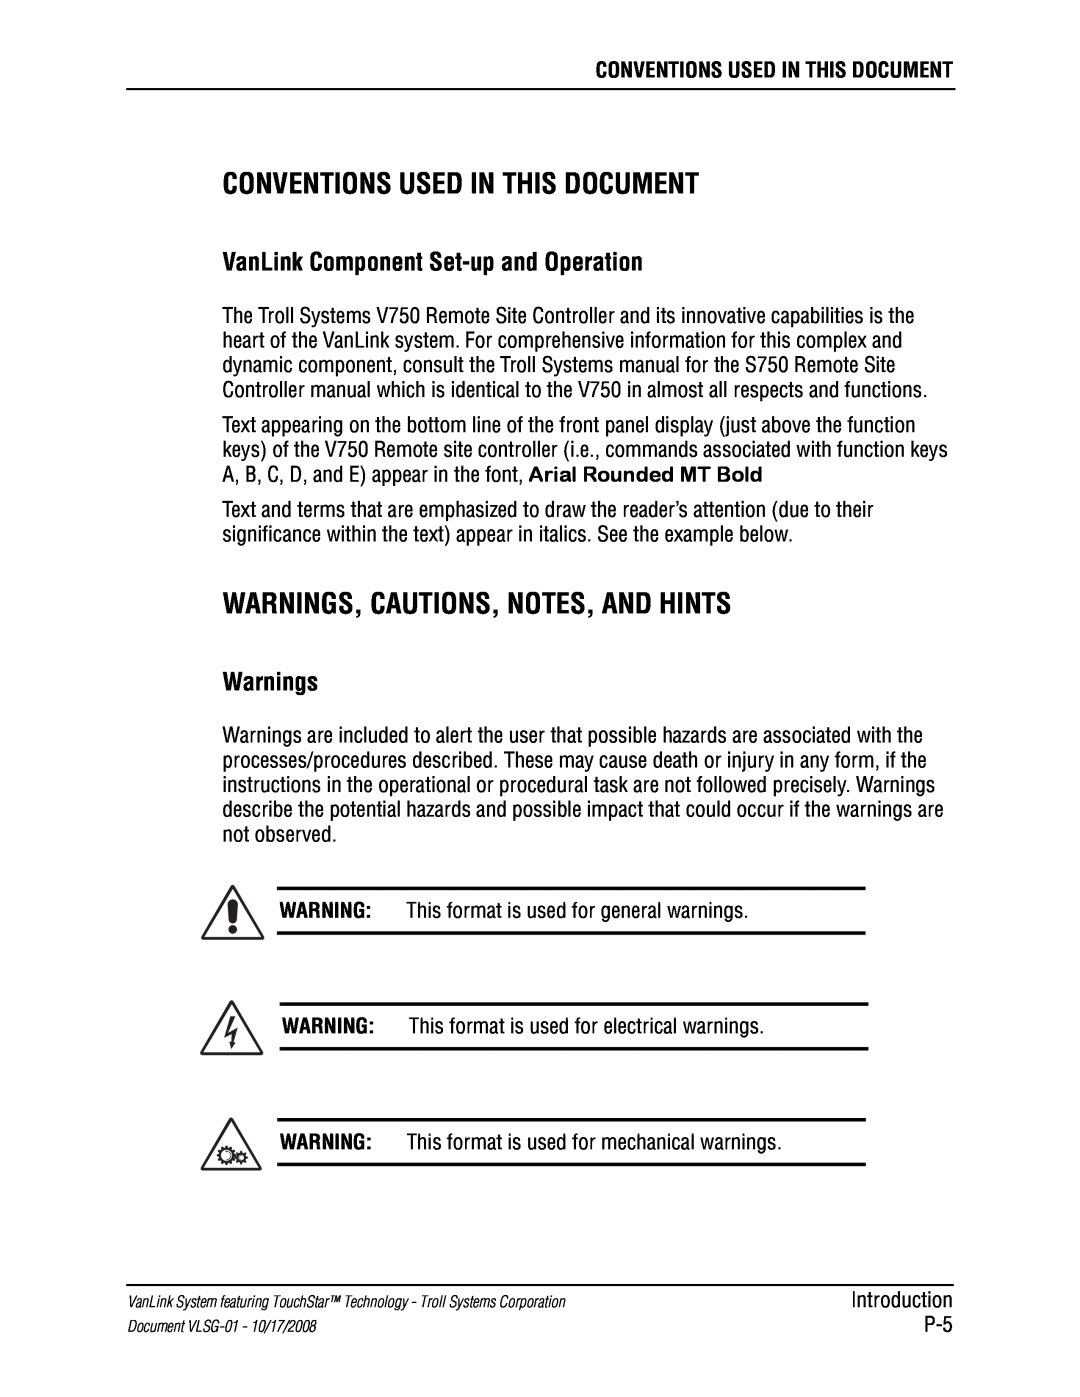 Kyocera VLSG-01 manual Conventions Used In This Document, Warnings, Cautions, Notes, And Hints 